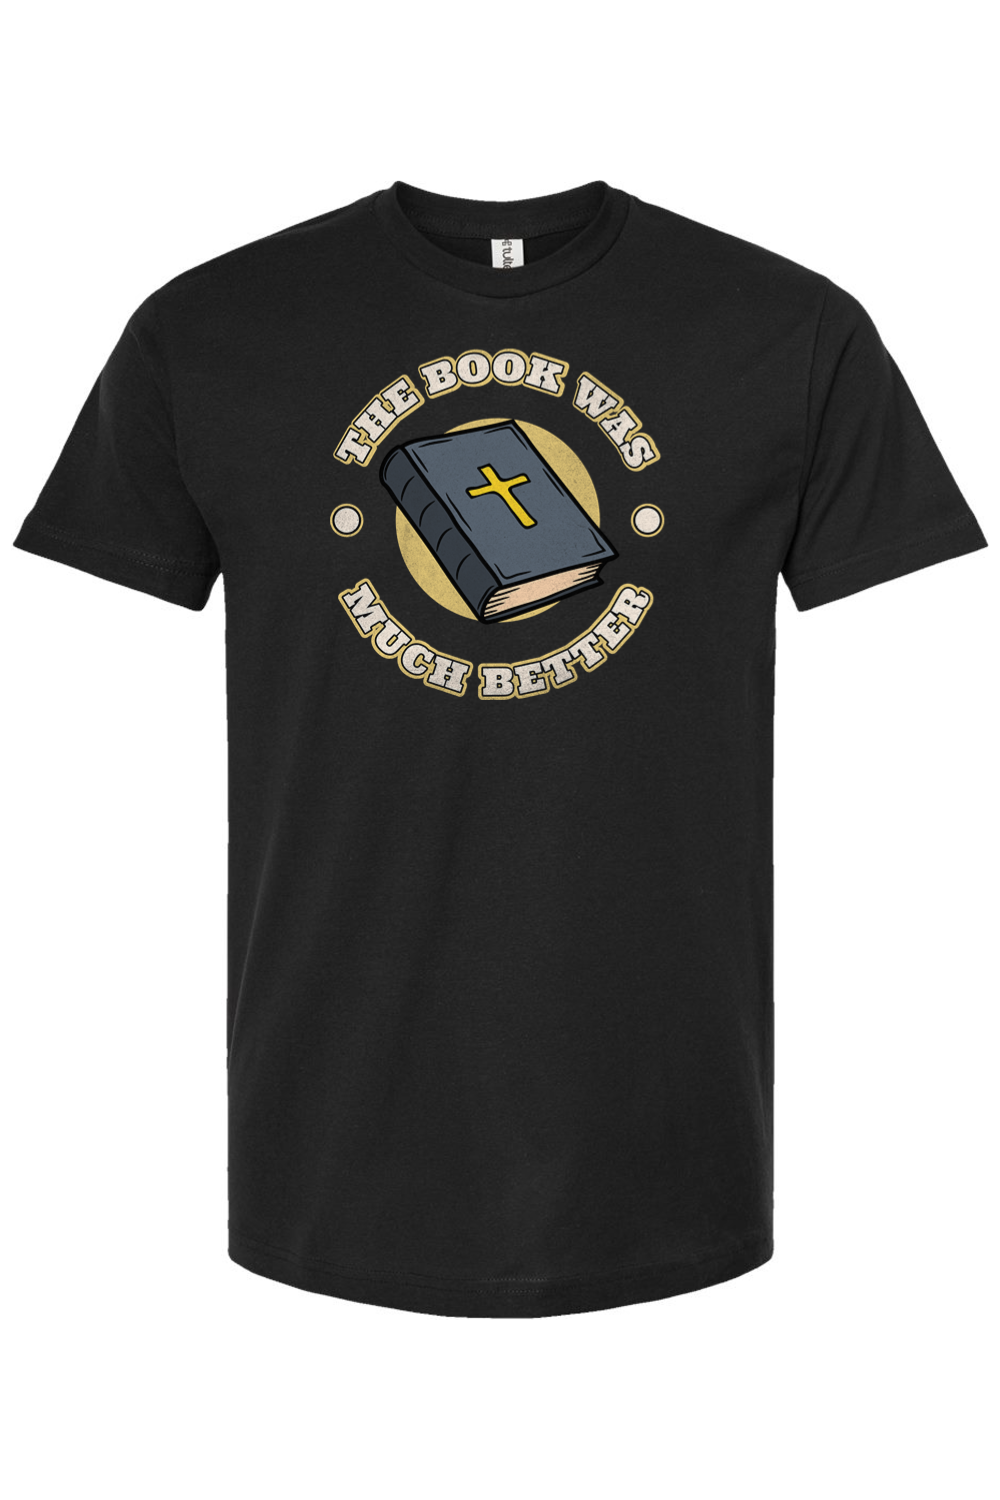 The Book Was Much Better - T-Shirt